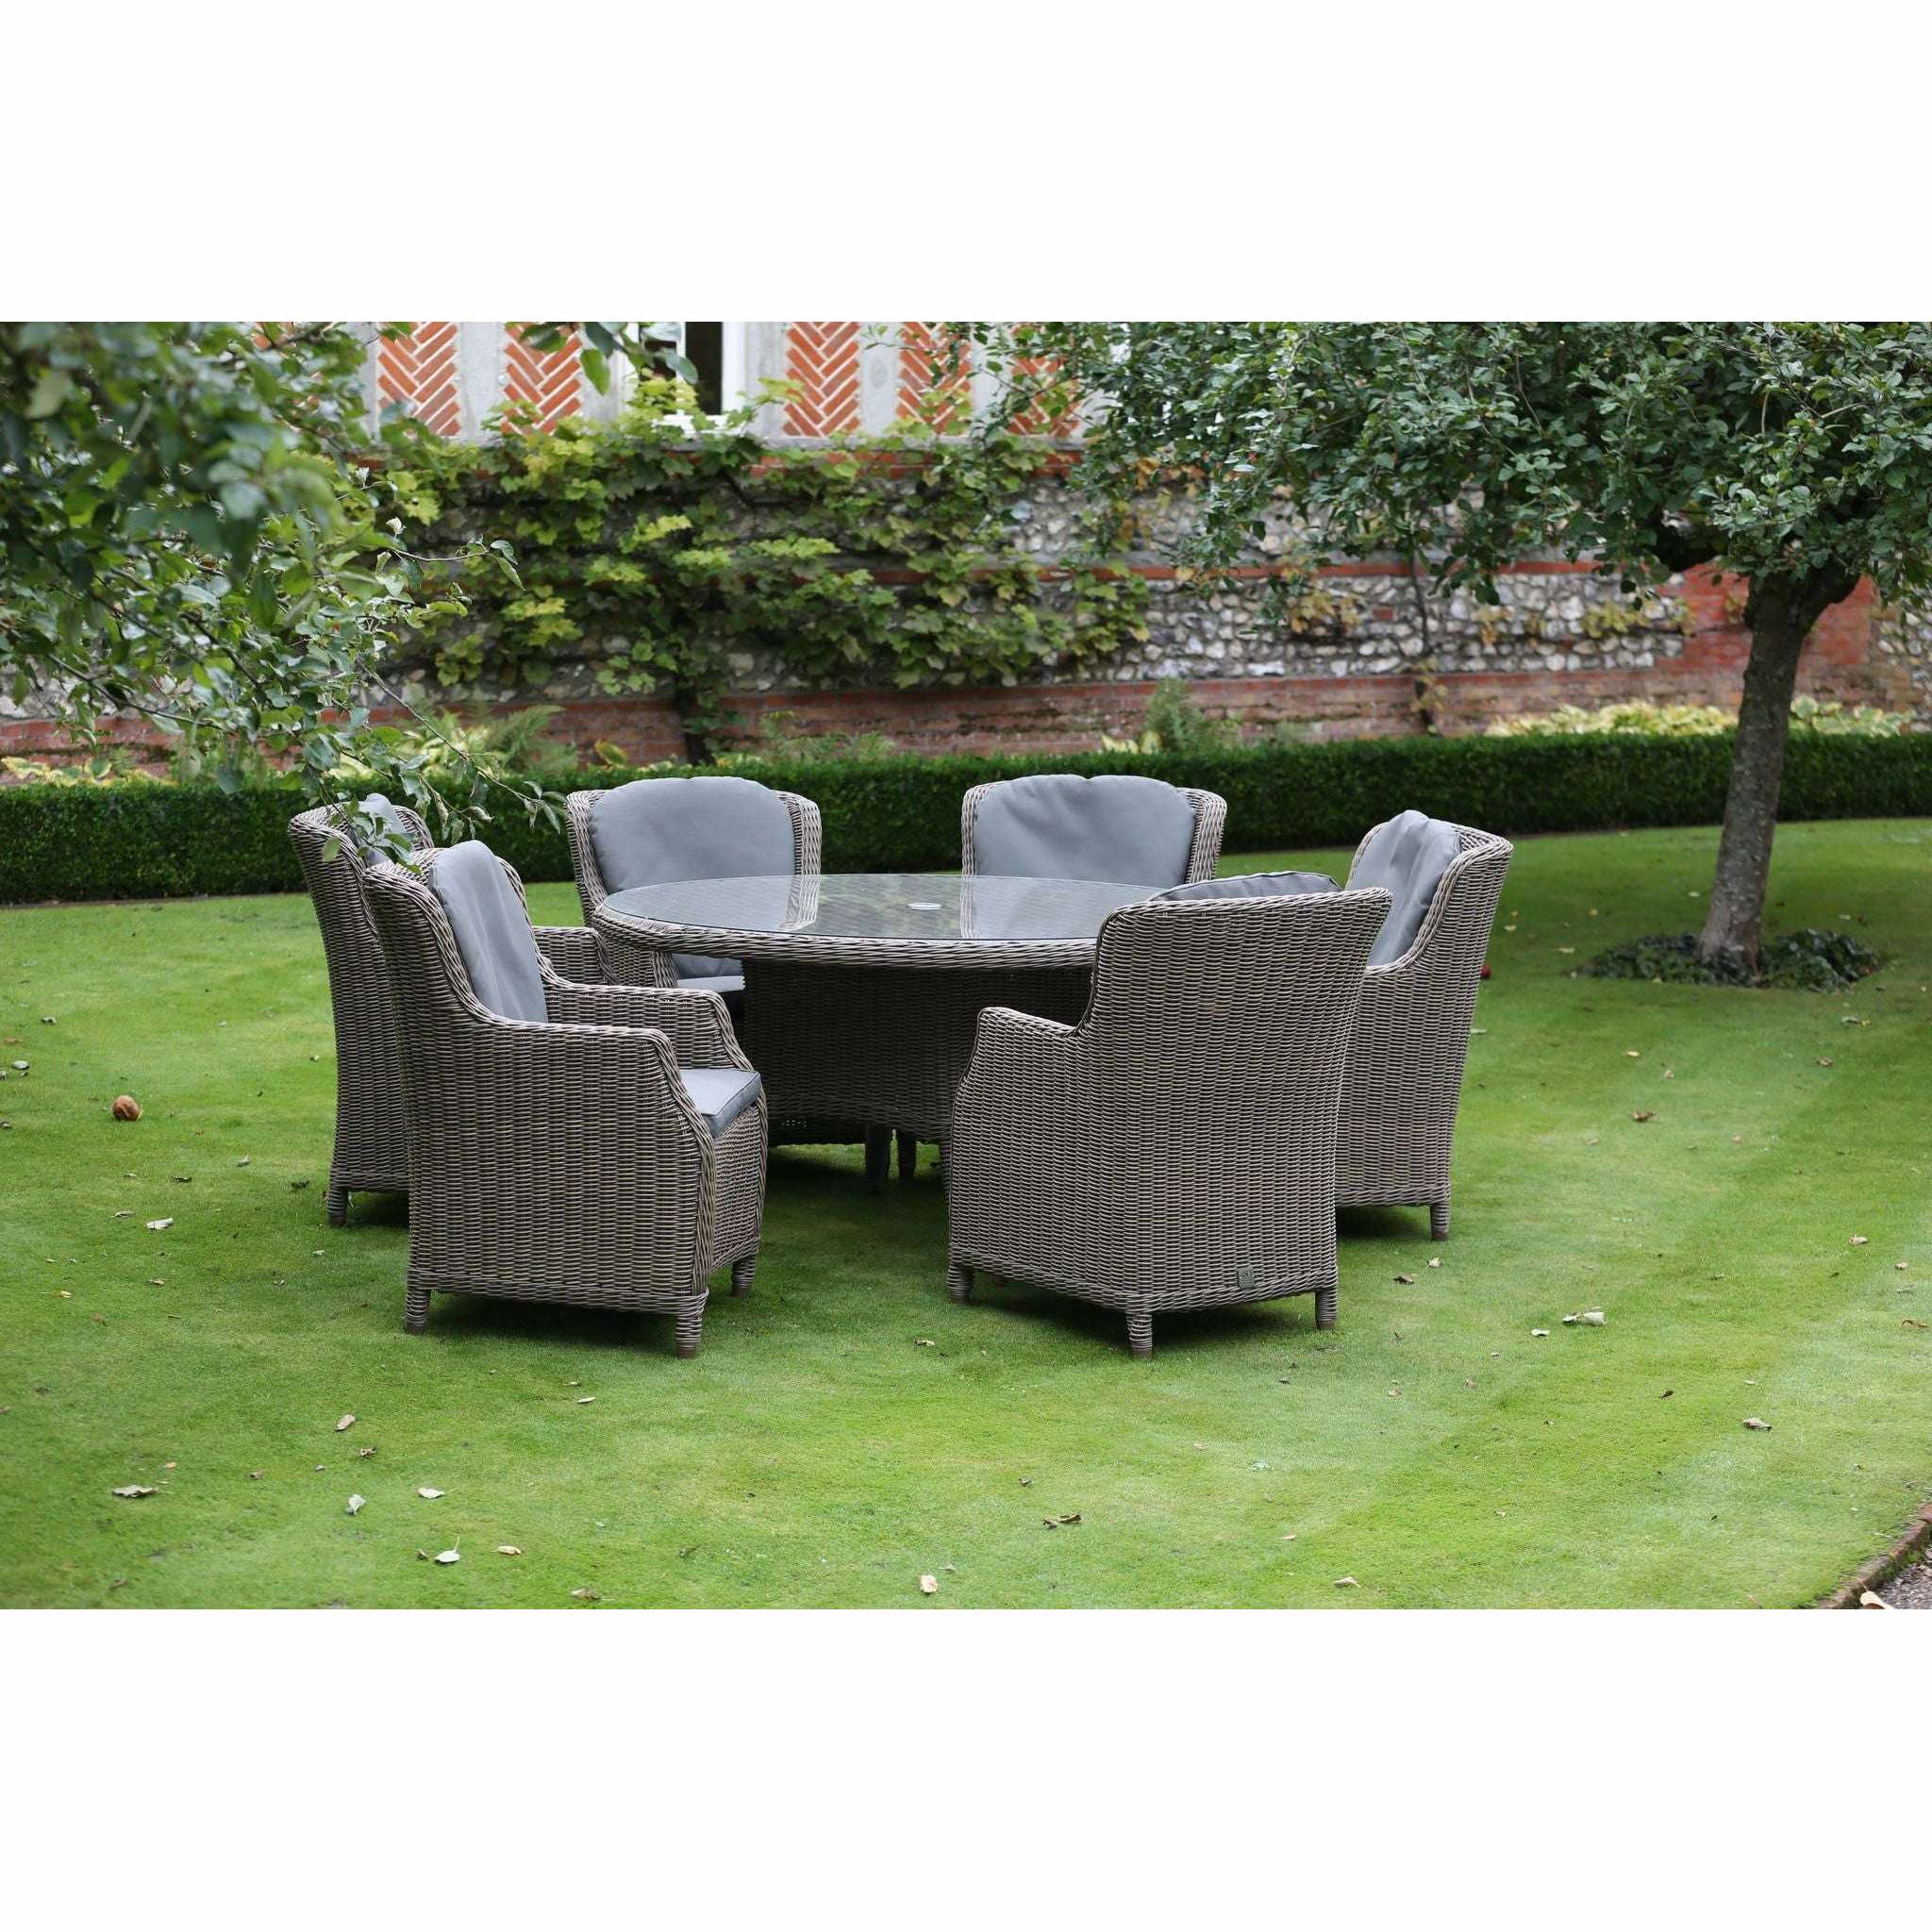 Exceptional Garden:4 Seasons Outdoor Brighton 6 Seater Dining set with Victoria Table